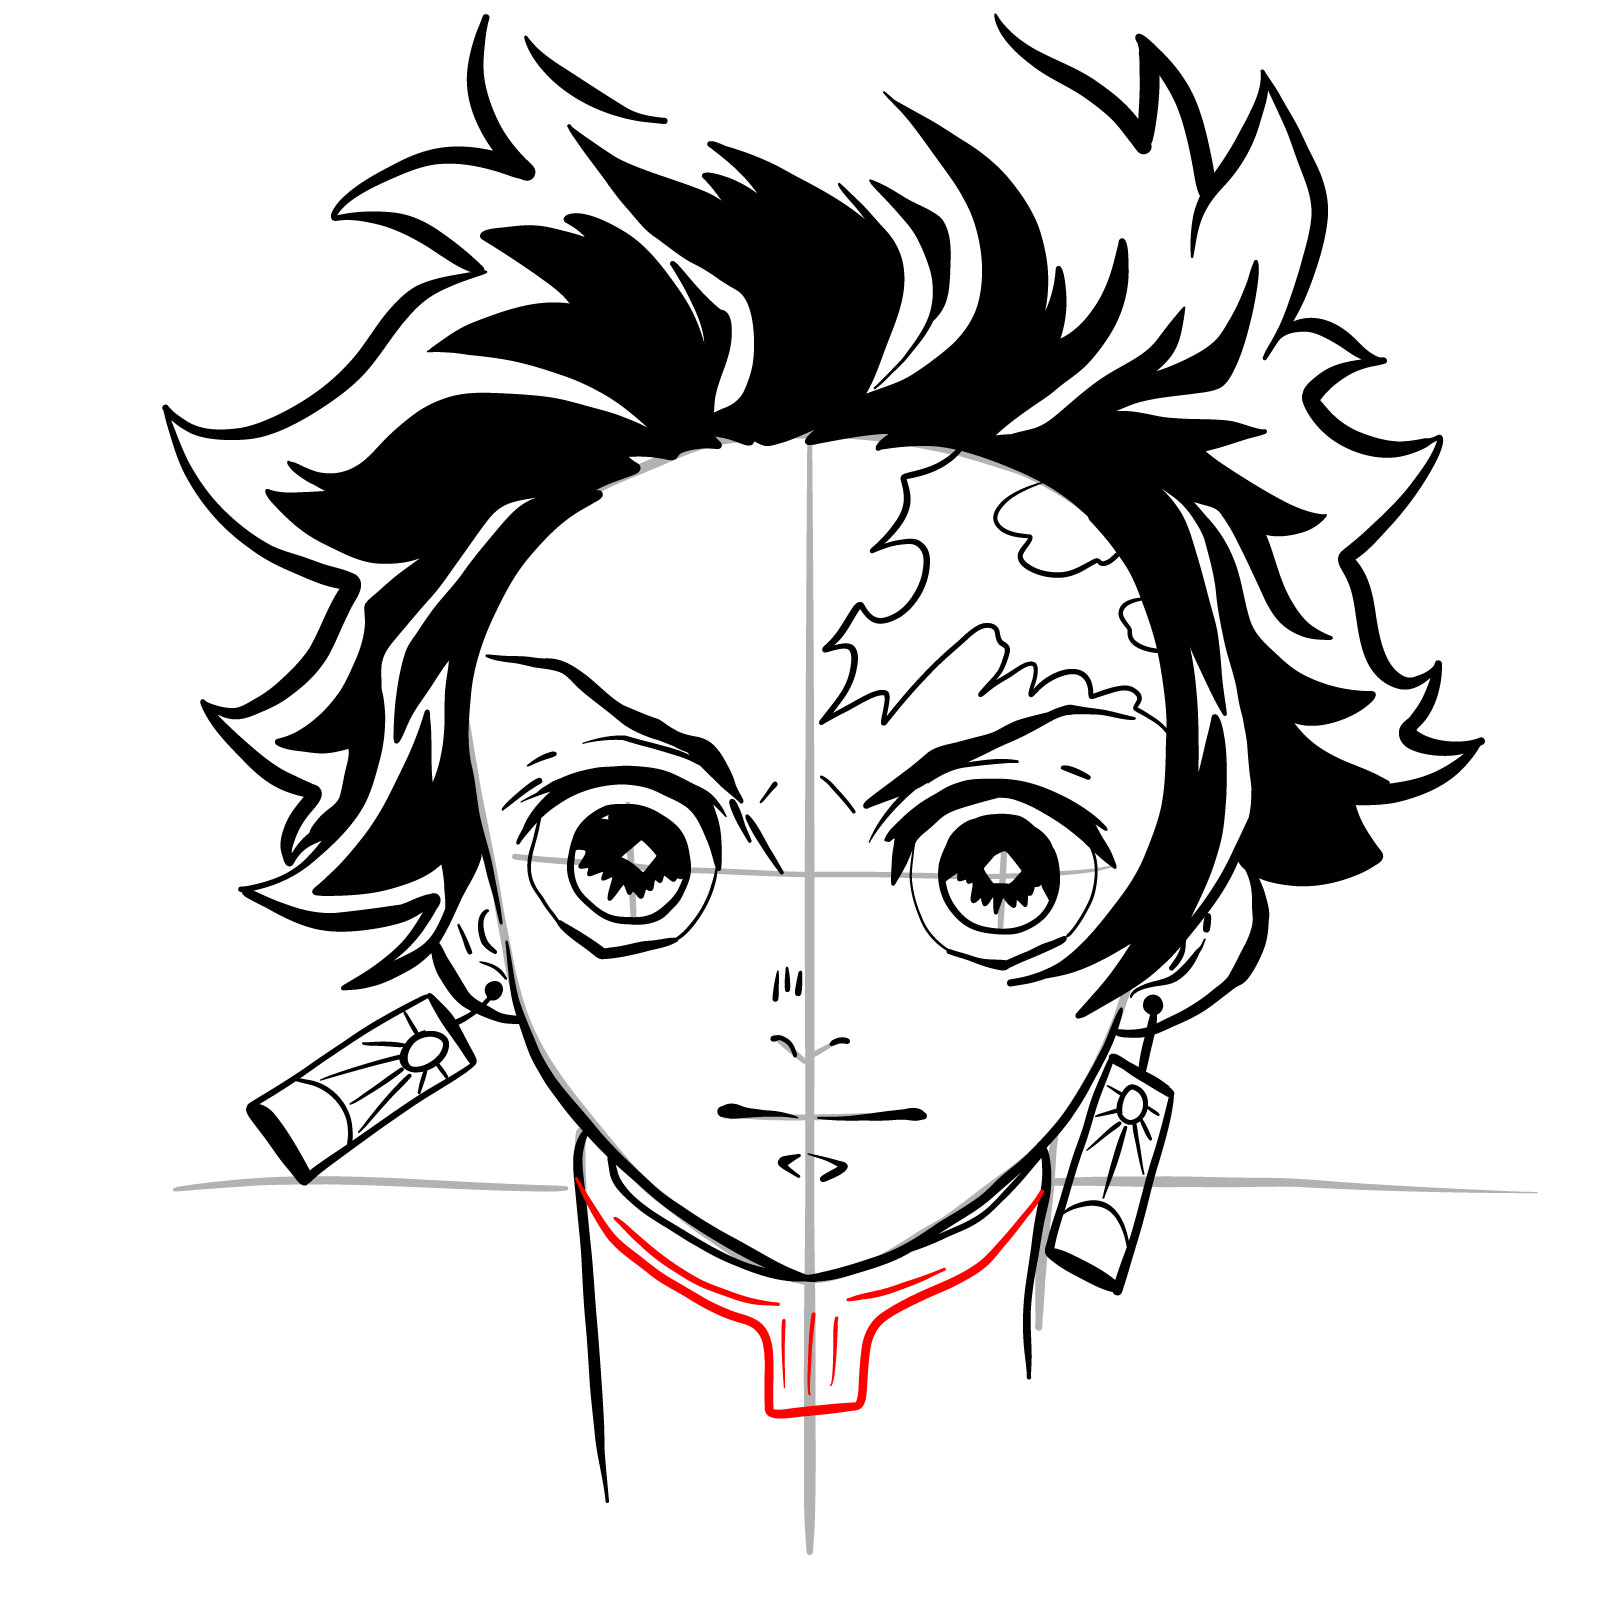 How to draw Tanjiro's face - Sketchok easy drawing guides